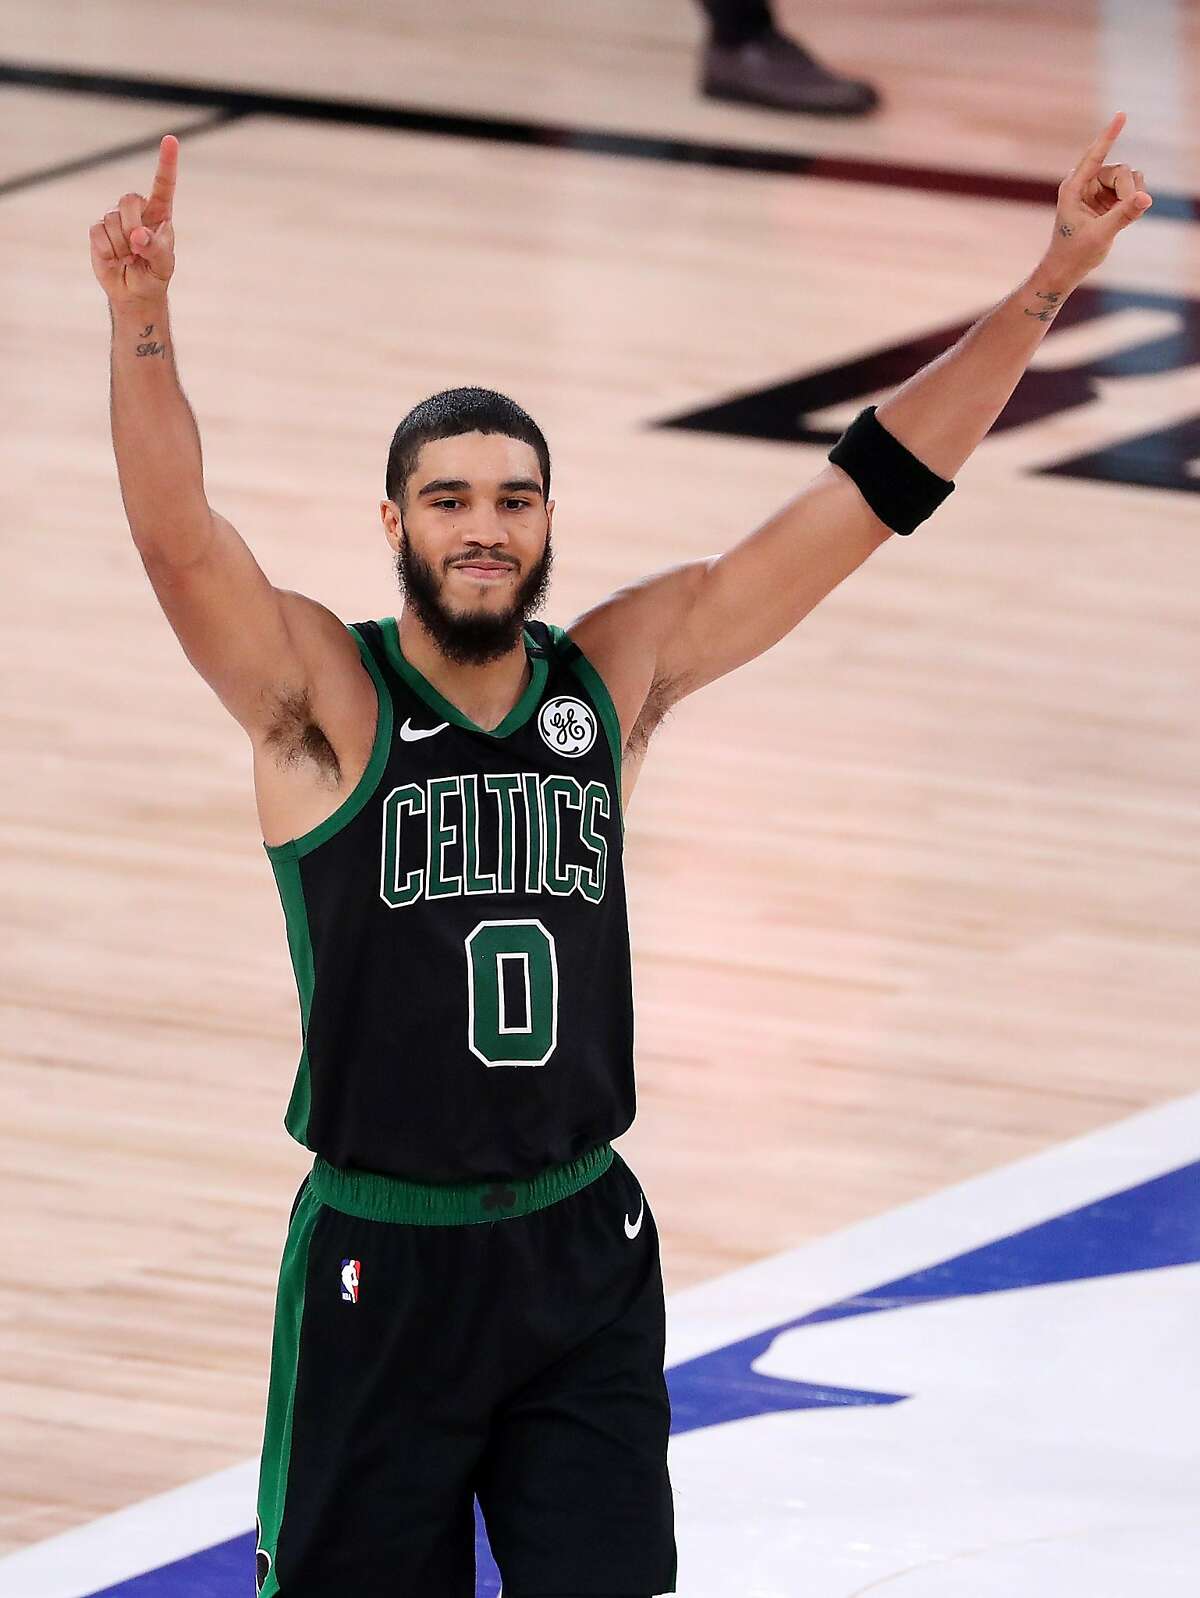 LAKE BUENA VISTA, FLORIDA - SEPTEMBER 11: Jayson Tatum #0 of the Boston Celtics reacts after their win against the Toronto Raptors in Game Seven of the Eastern Conference Second Round during the 2020 NBA Playoffs at AdventHealth Arena at the ESPN Wide World Of Sports Complex on September 11, 2020 in Lake Buena Vista, Florida. NOTE TO USER: User expressly acknowledges and agrees that, by downloading and or using this photograph, User is consenting to the terms and conditions of the Getty Images License Agreement. (Photo by Michael Reaves/Getty Images)